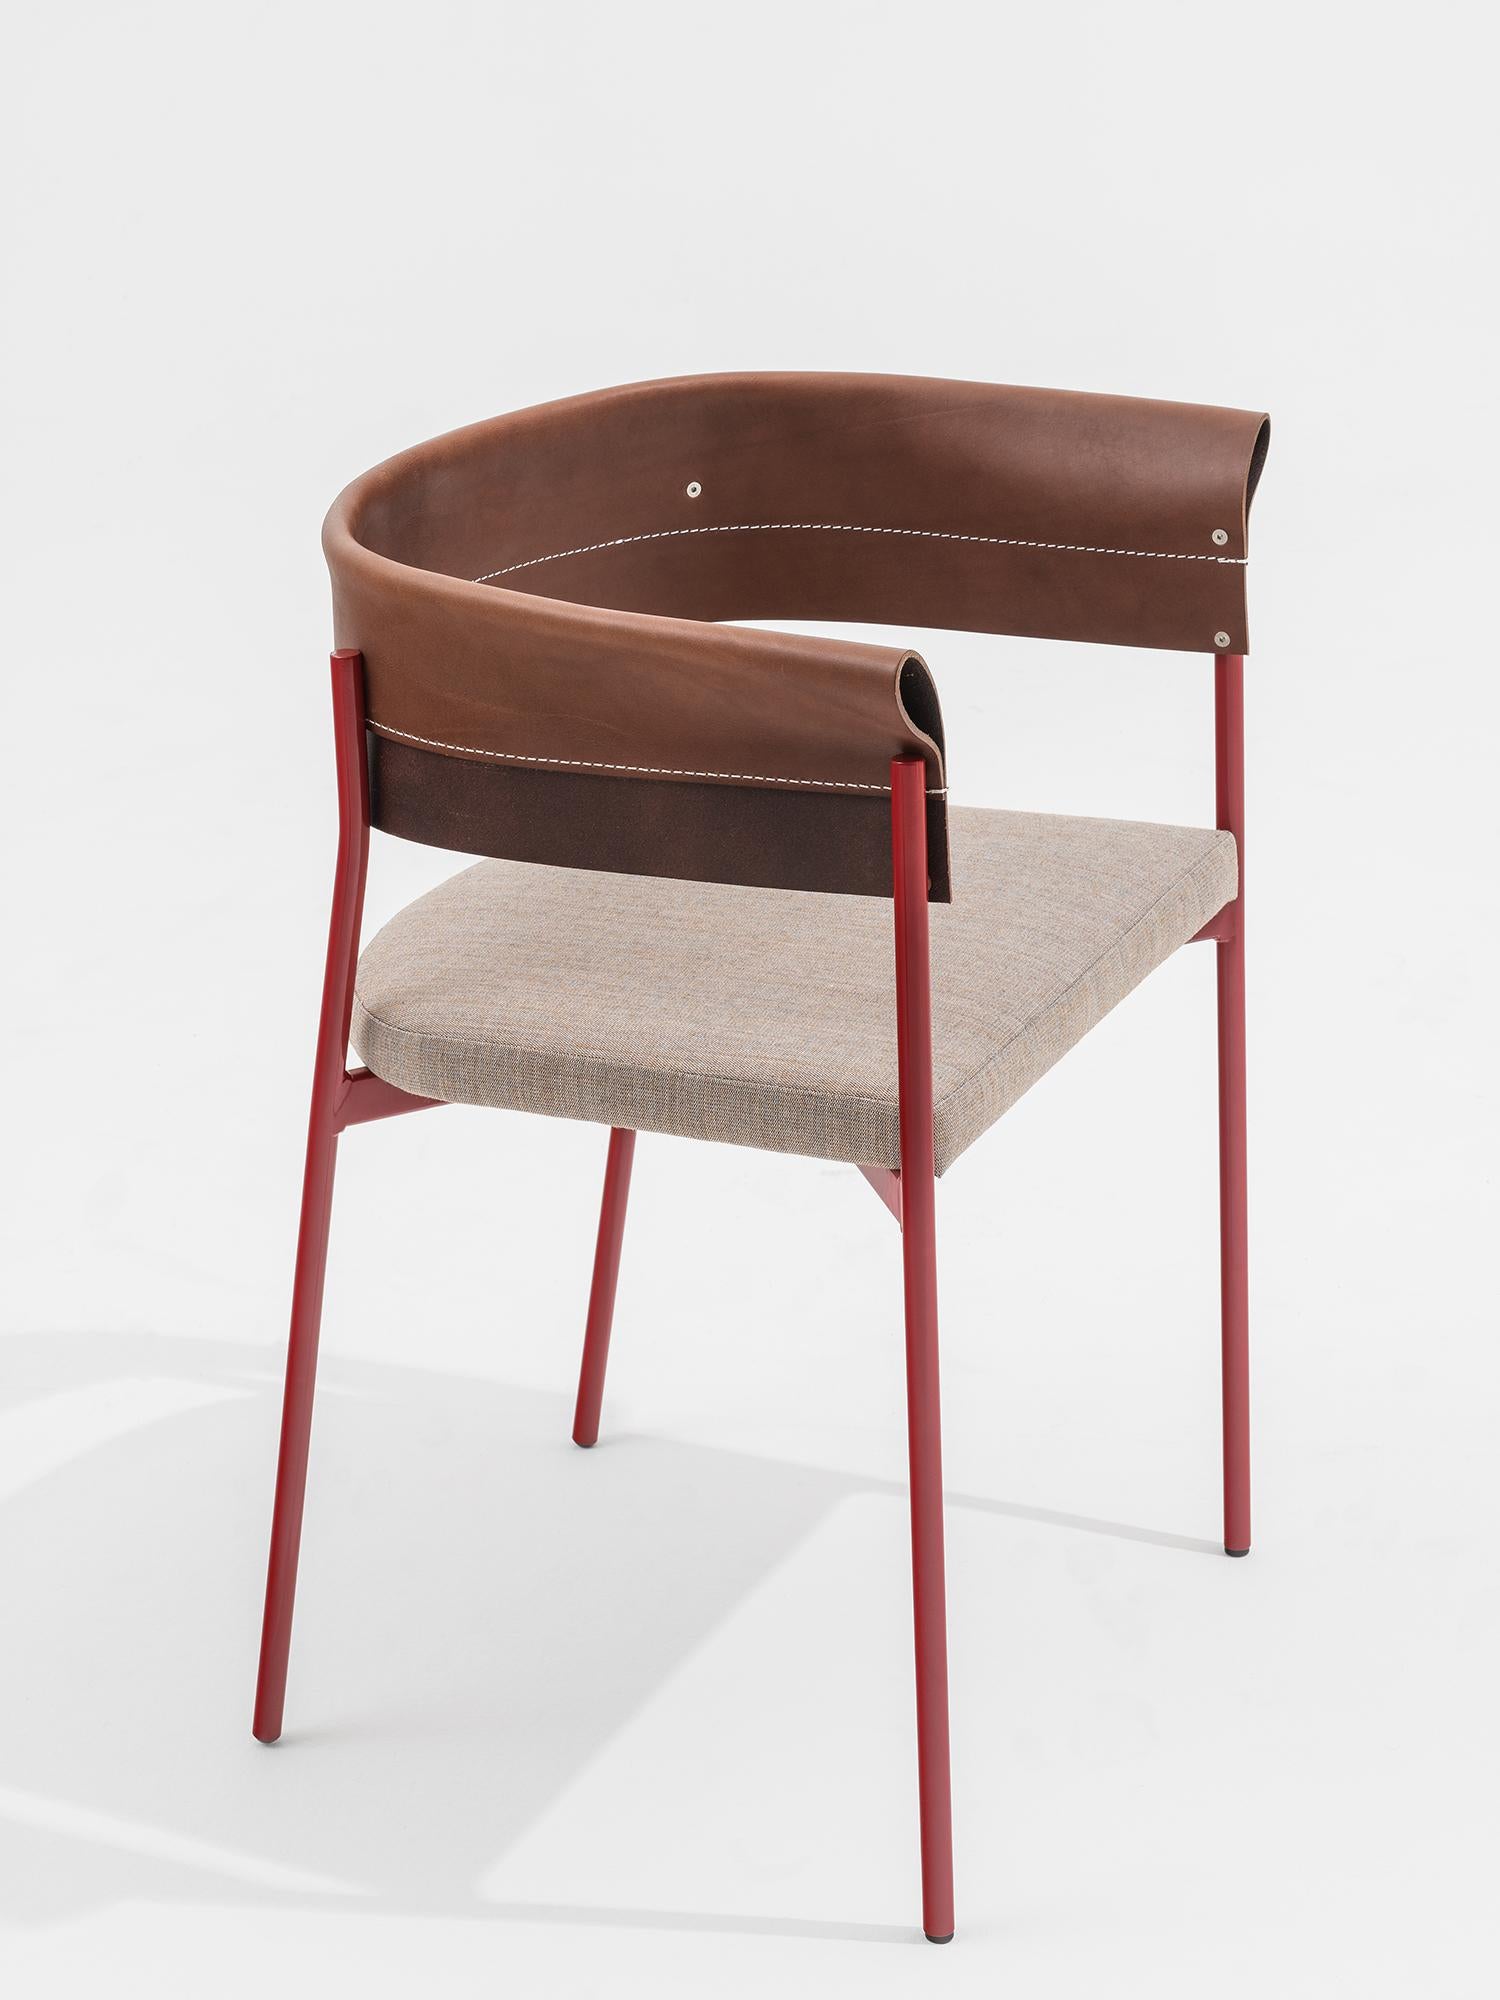 Modern Contemporary Tailor Made Gomito Chair, Handcrafted Folded Leather Backrest For Sale